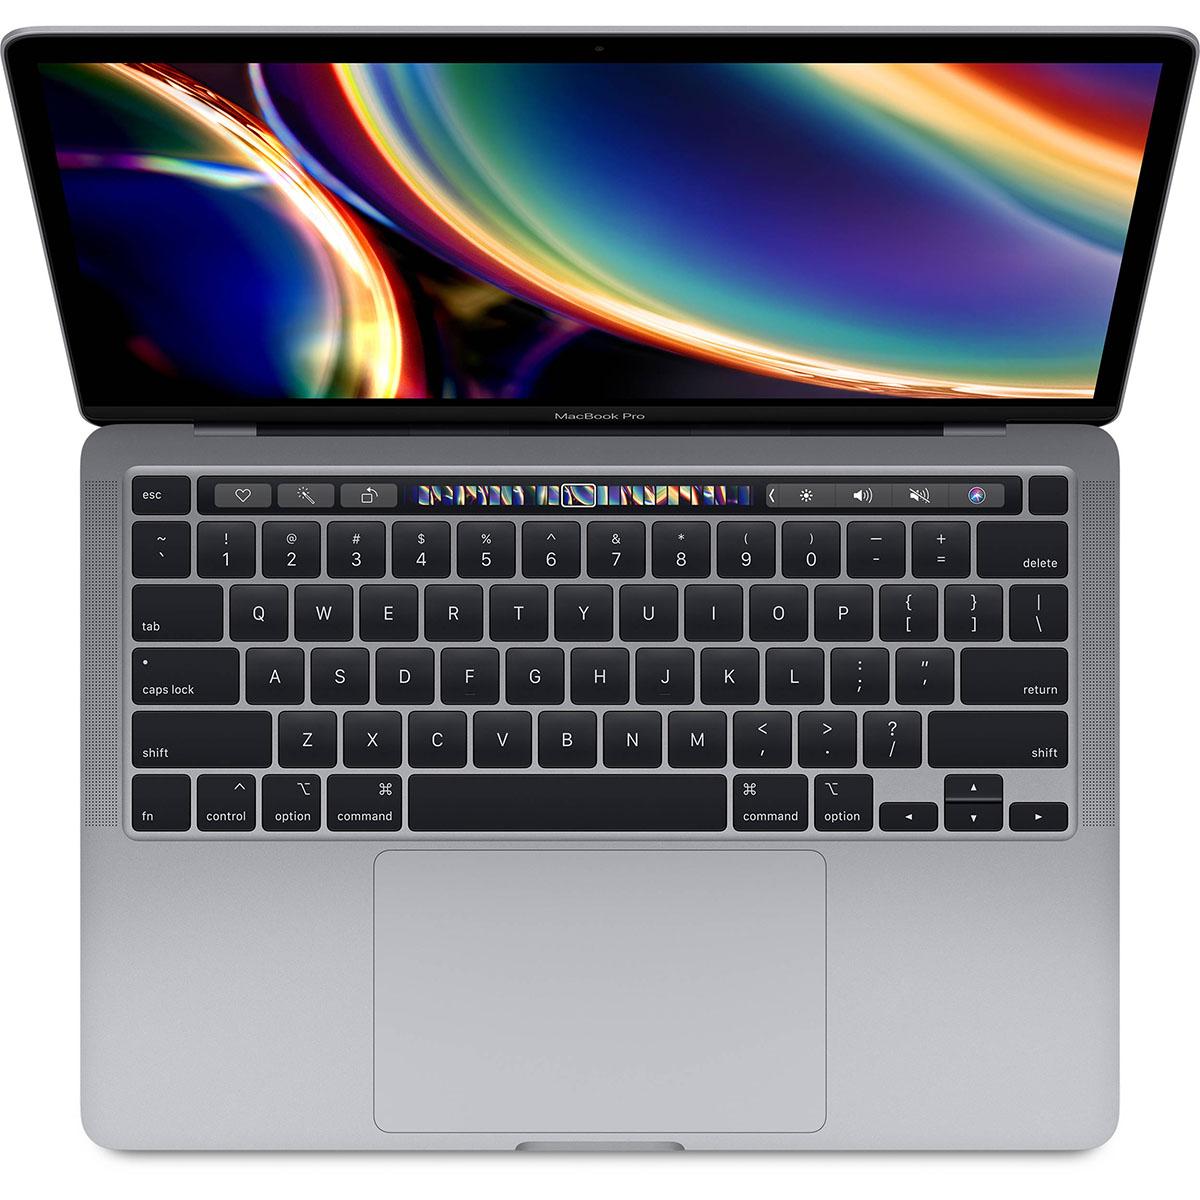 Apple Macbook Pro 13in i5 16GB 512GB Space Gray Notebook Laptop for $1349 Shipped